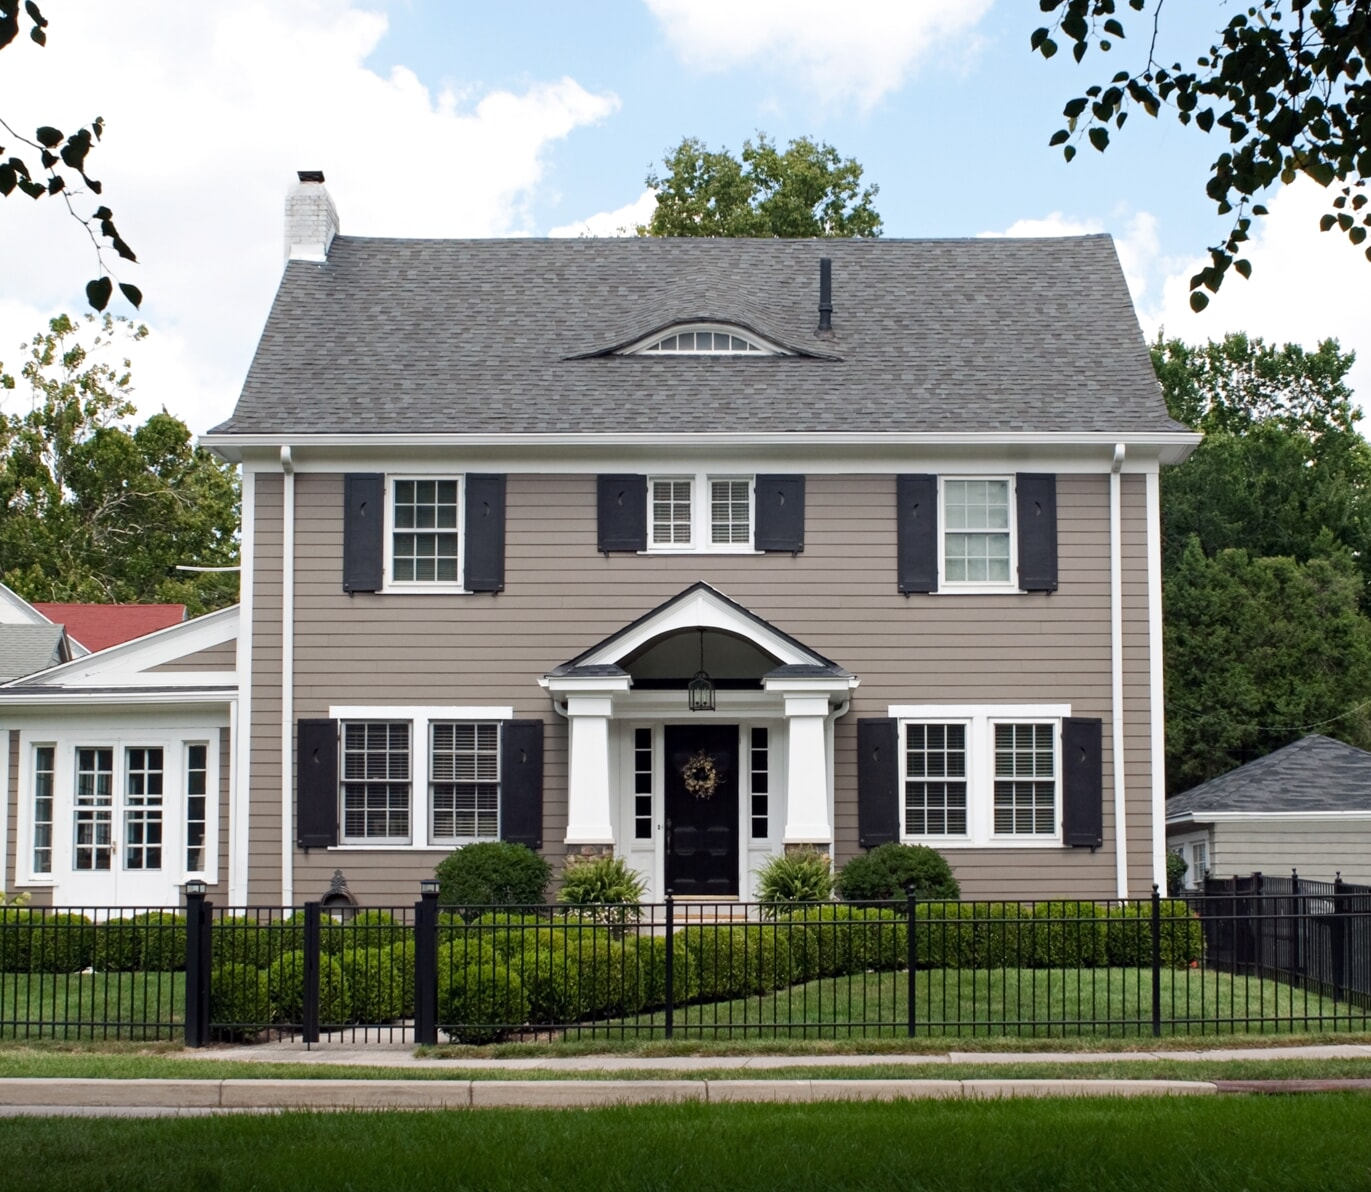 Two story beige home with white trim and black fence